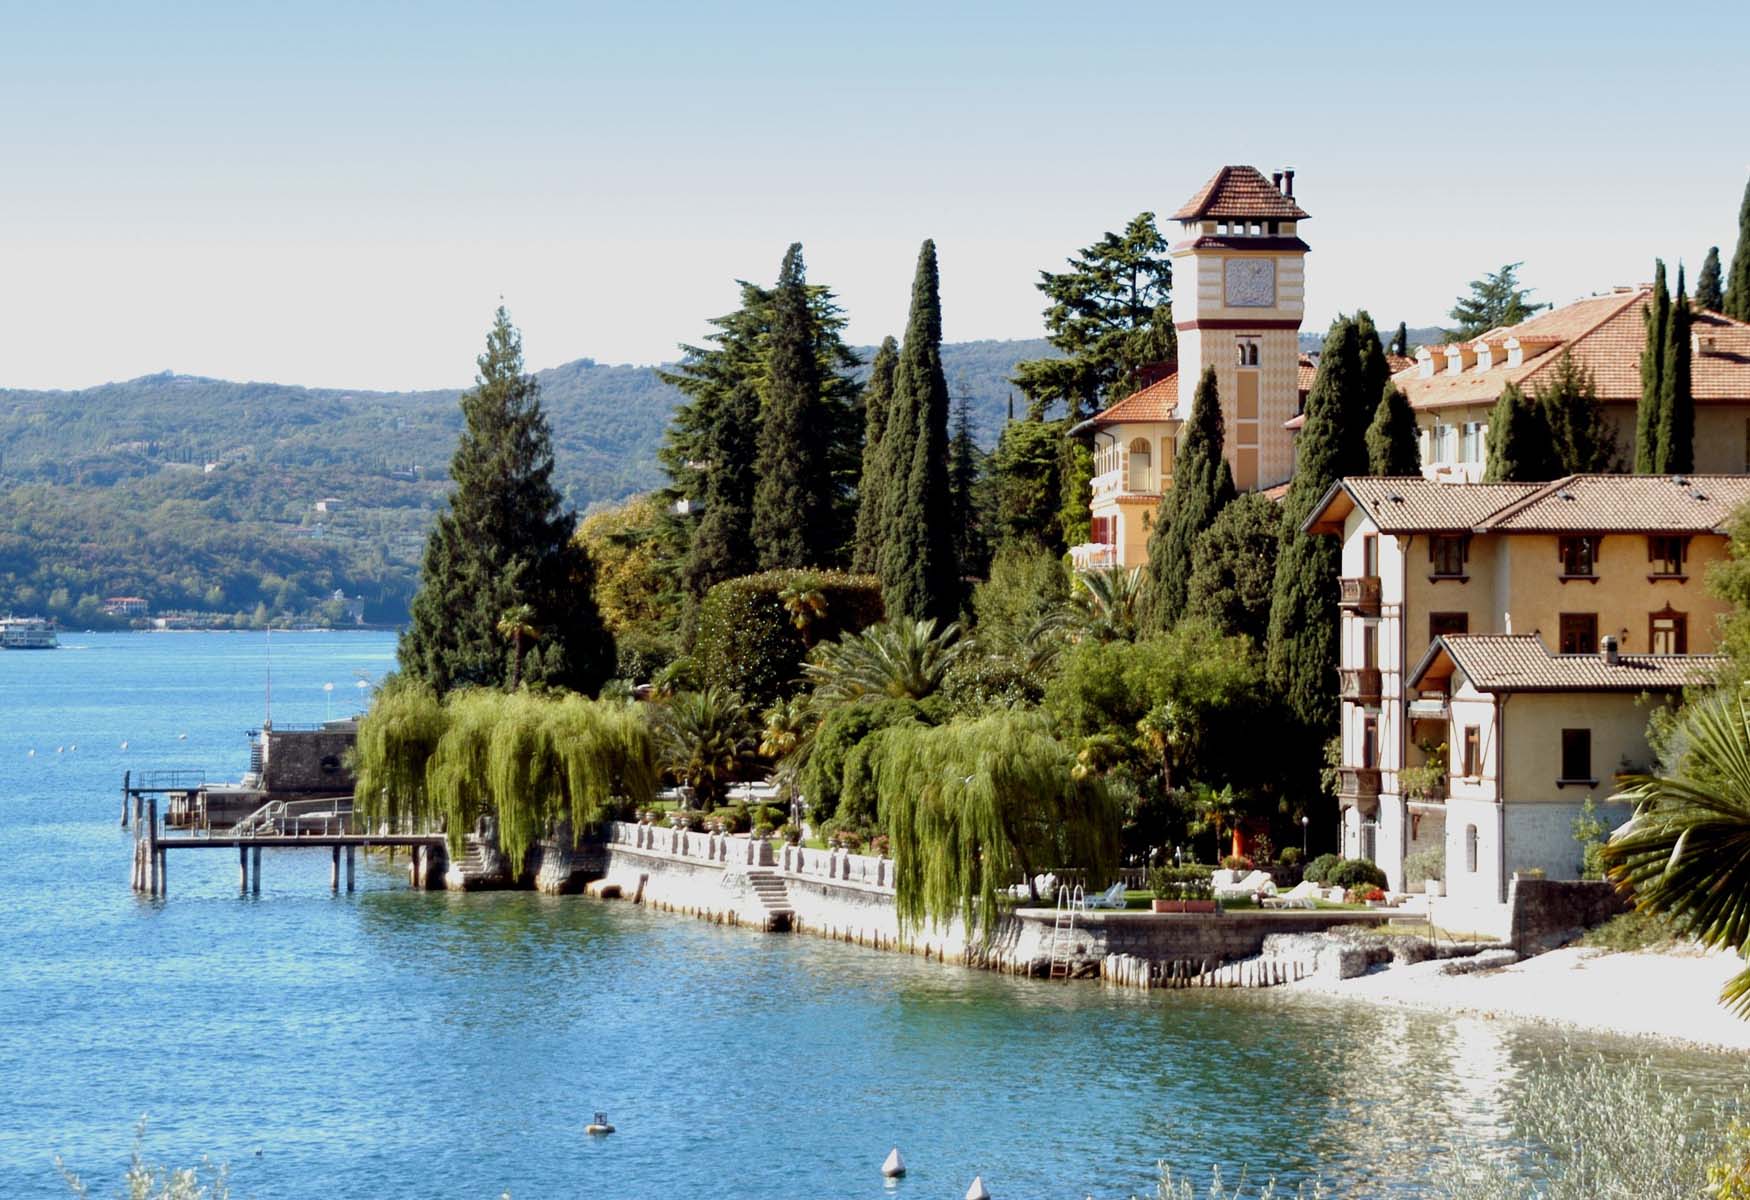 Where To Stay In Lake Garda: The BEST Areas